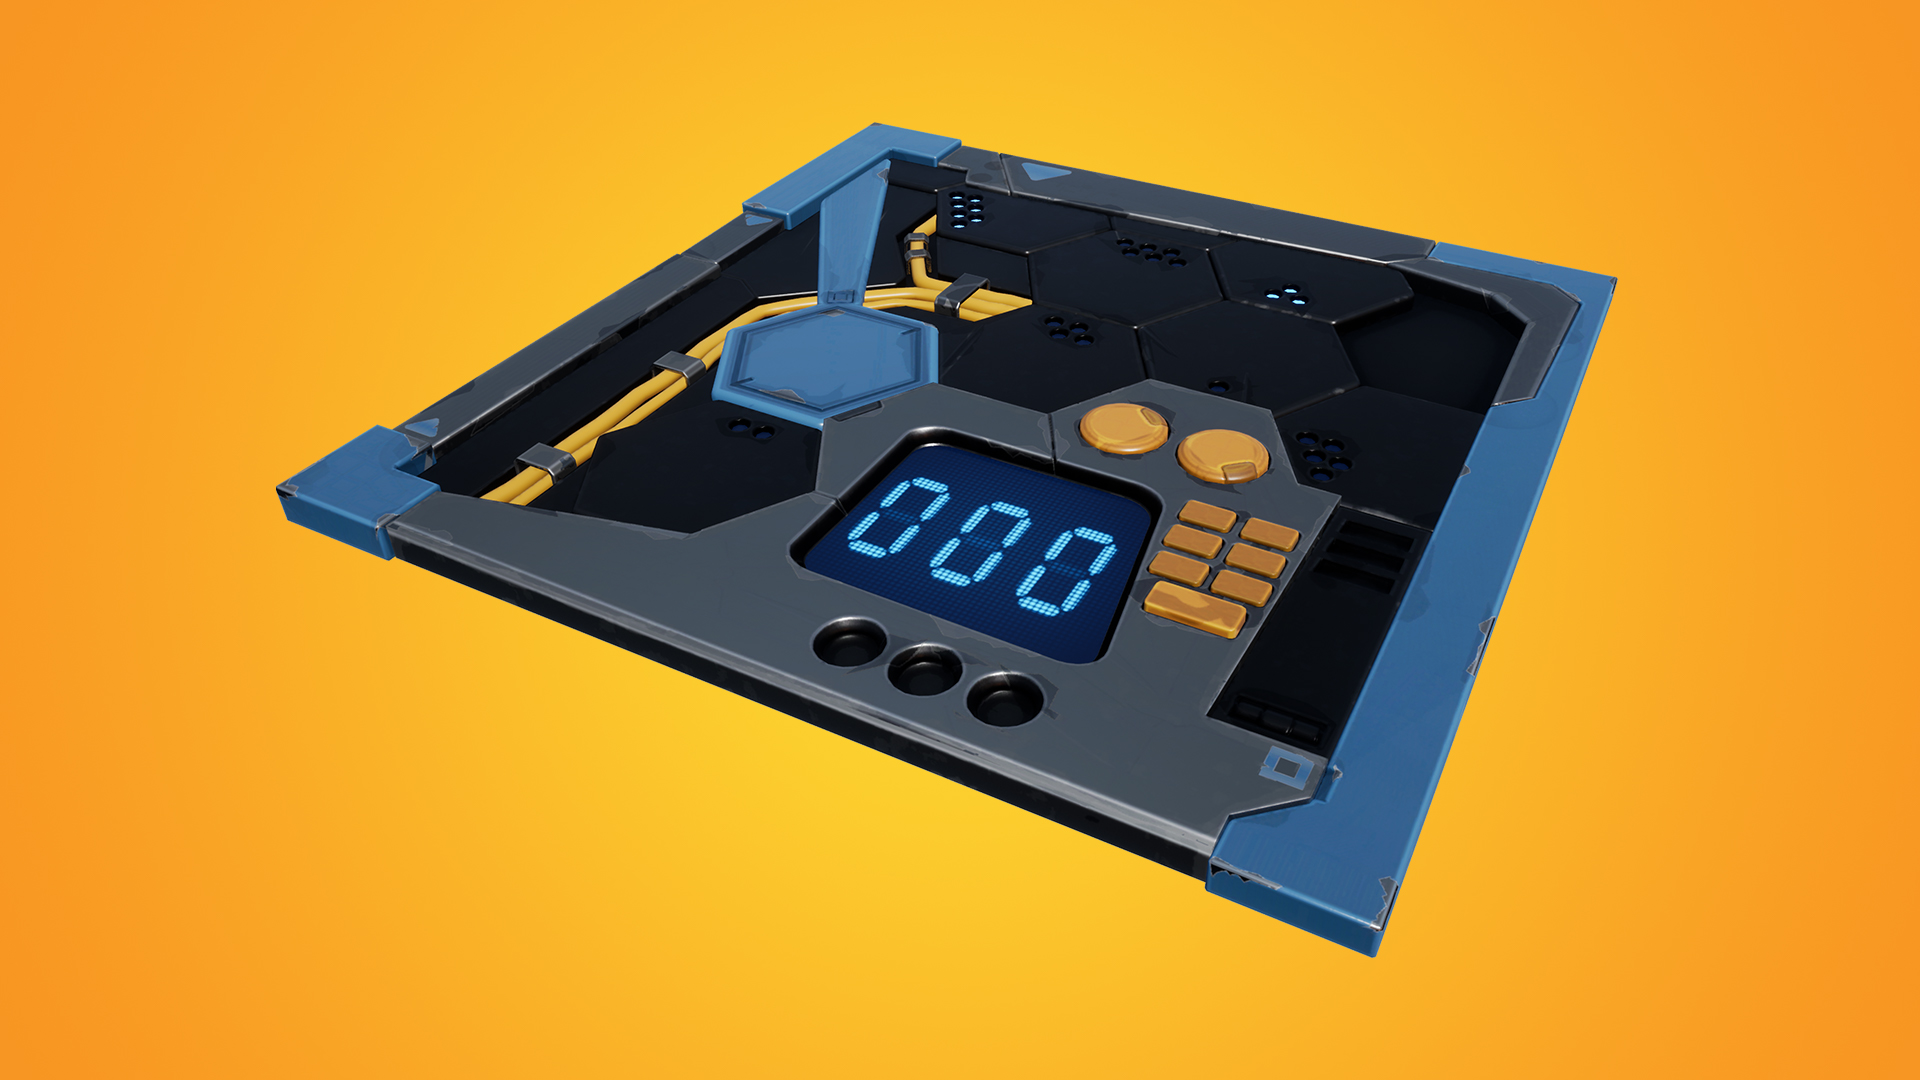 Fortnite Creators on Twitter: "Take a chance the Random Number Generator device! Have your players test their luck adding the RNG device to your games. Check out these examples ⬇️